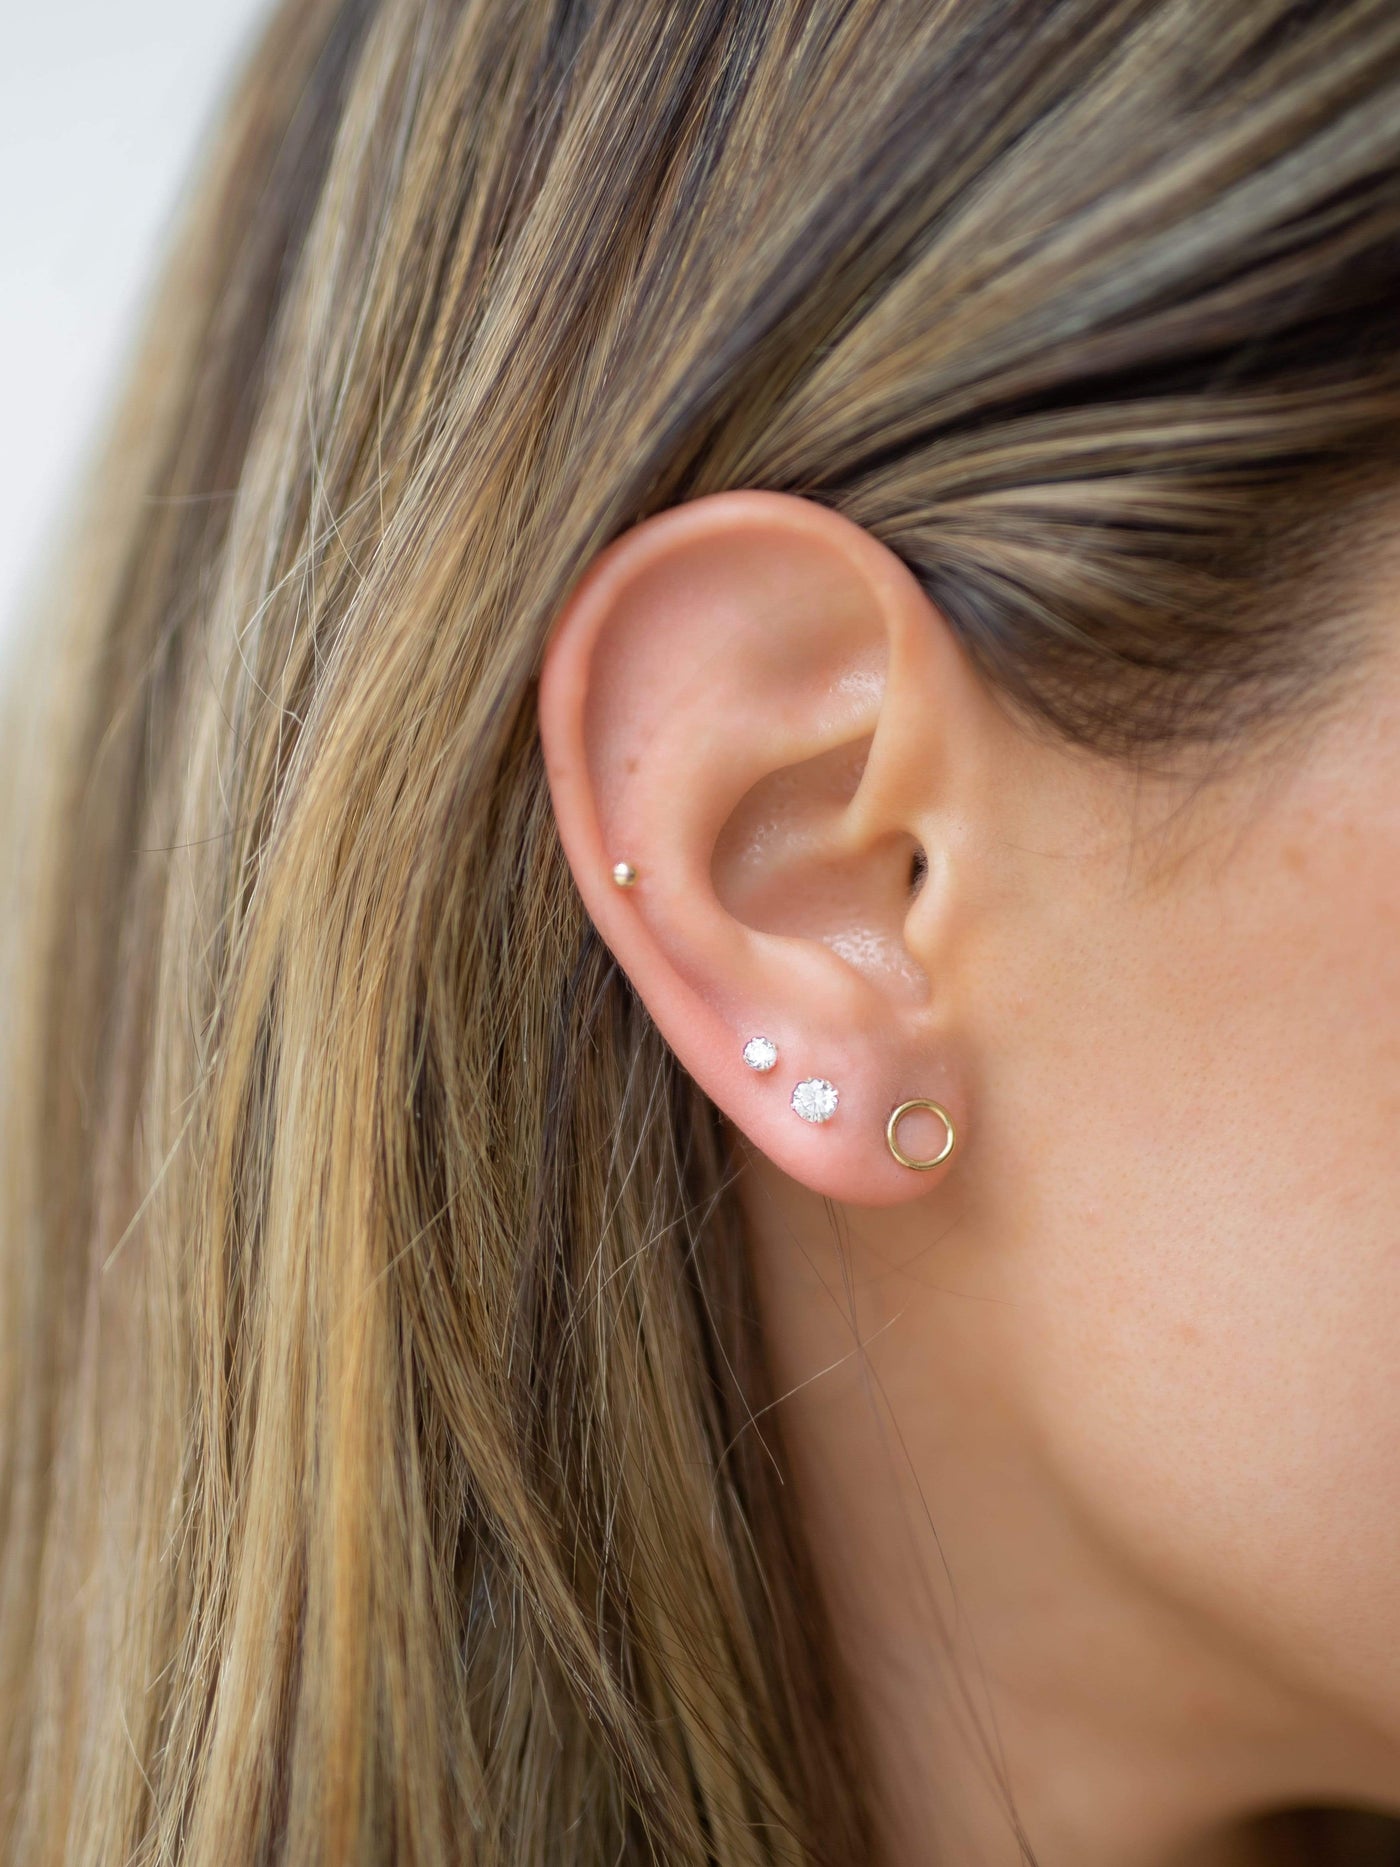 Ear showing different 14k gold fill earrings including a circle stud earring, 4mm cz stud earring and a 2mm ball earring